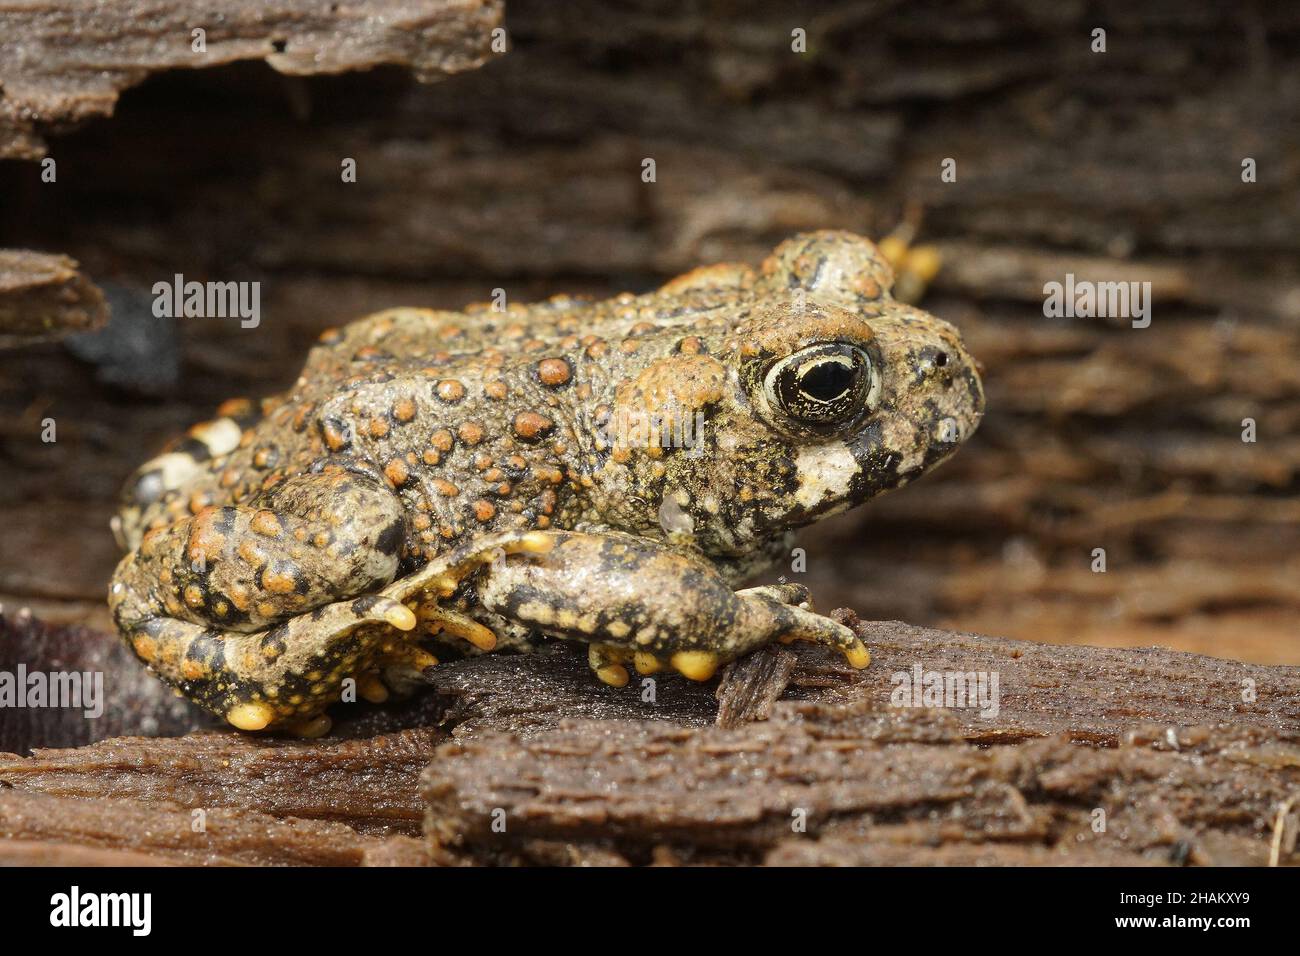 Closeup on a brassy colored juvenile of the Western toad, Anaxyrus boreas sitting on wood in North California Stock Photo